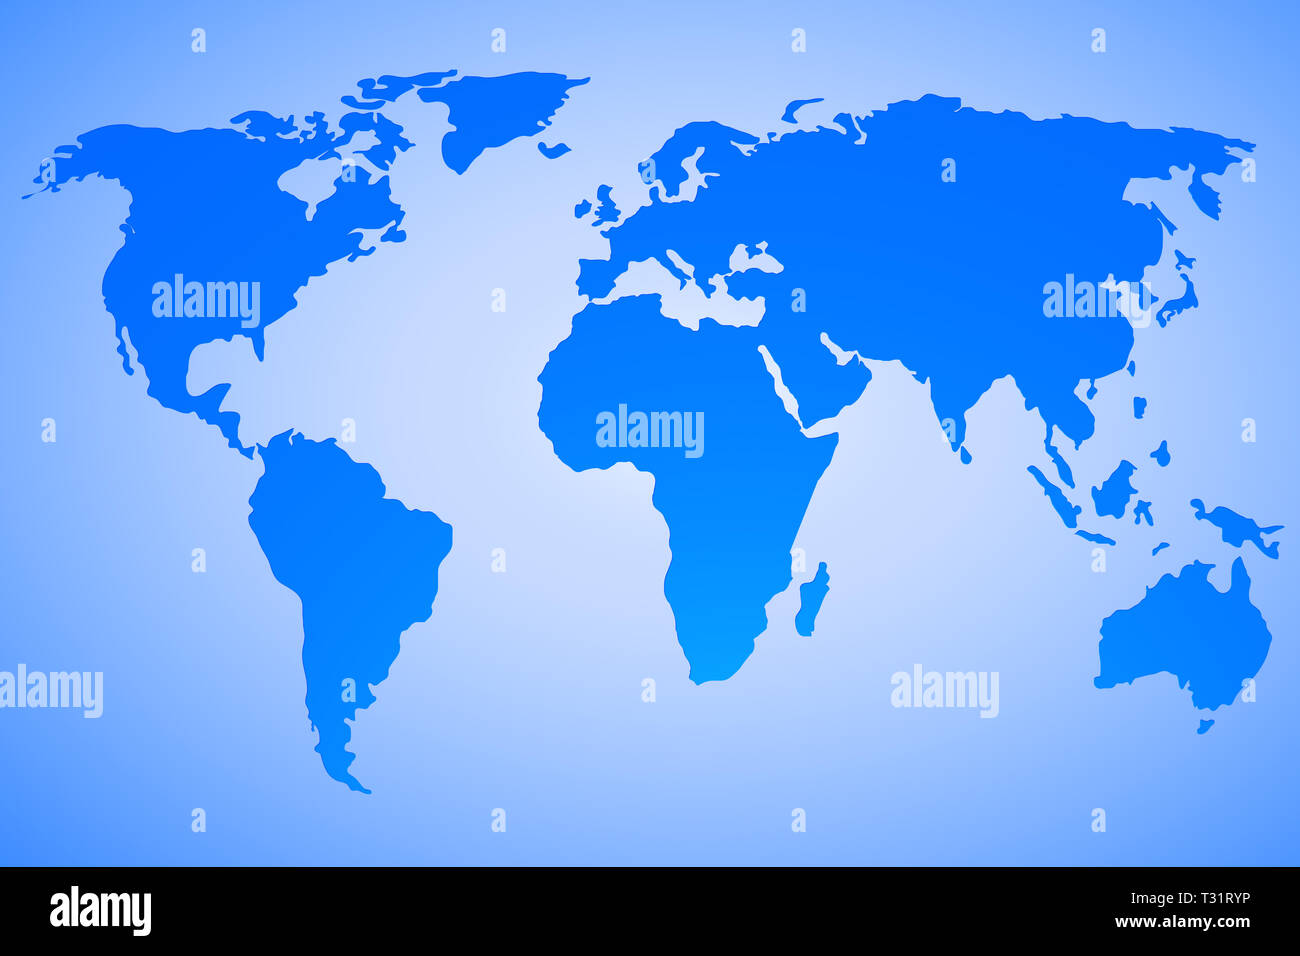 world map vector design on blue gradient background. Map used to trace http://www.lib.utexas.edu/maps/world maps/world pol02.jpg Their copyright state Stock Photo